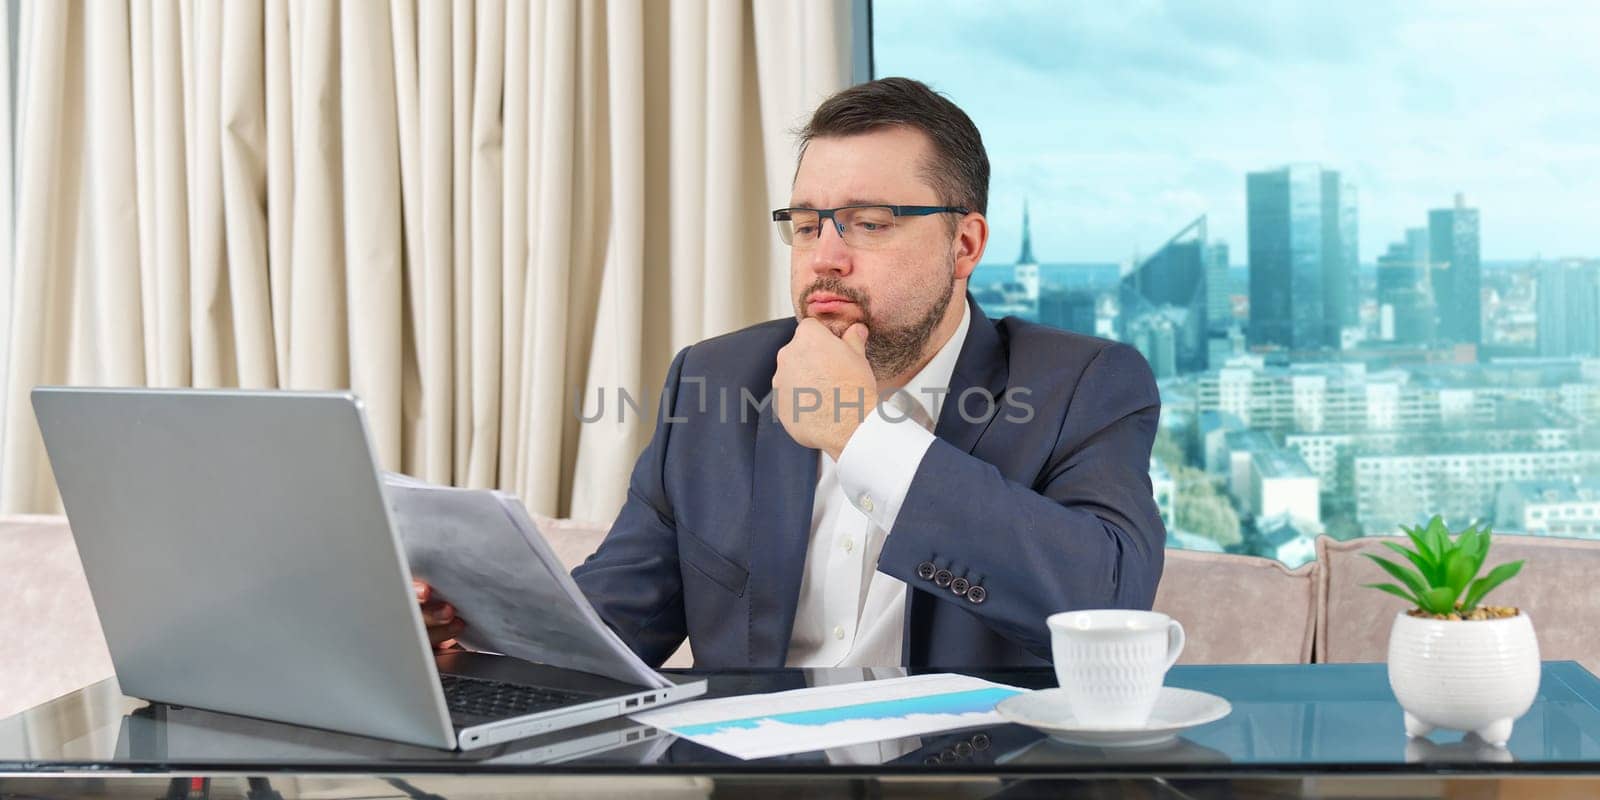 Happy businessman working on laptop in home office. financial investor working in the office. Accountant working on consolidated financial report of corporate operations.